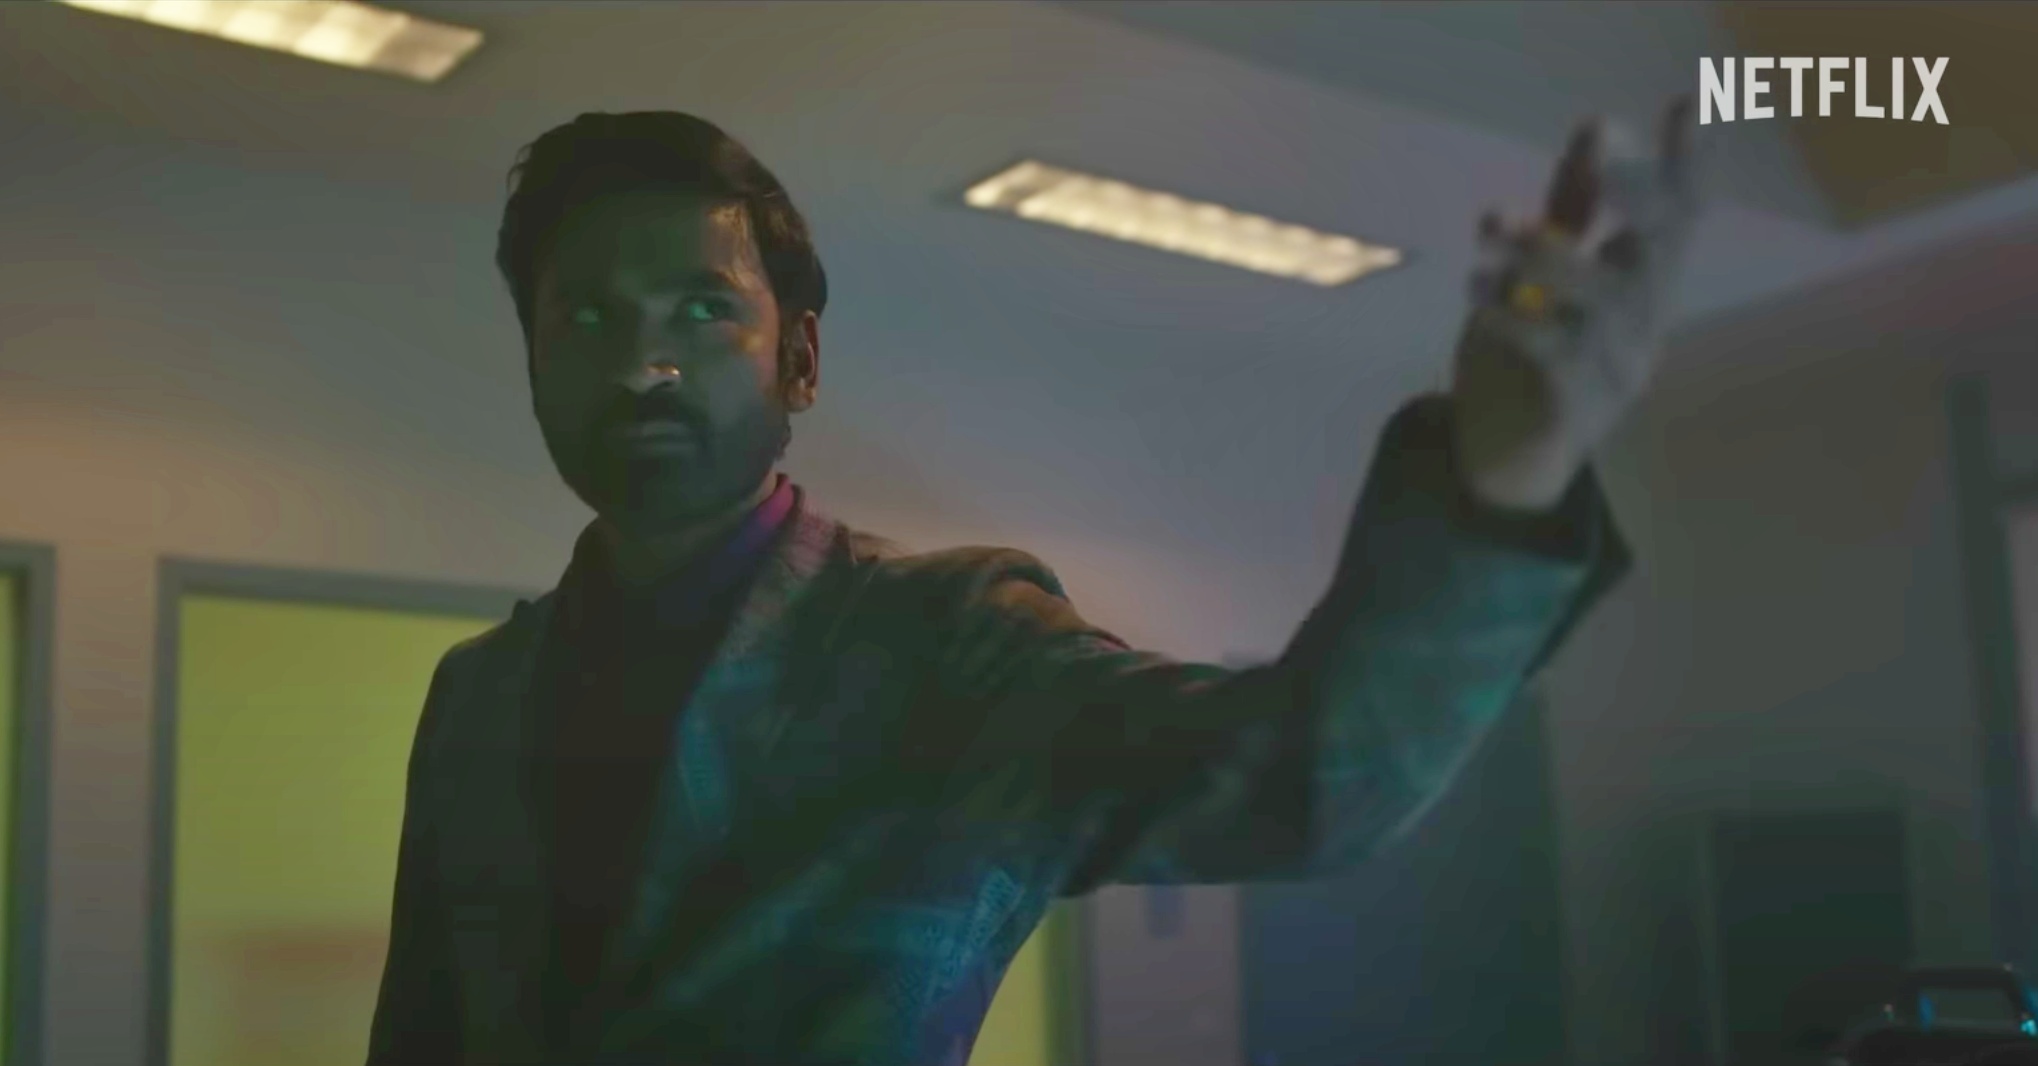 Are Dhanush fans disappointed with The Gray Man trailer